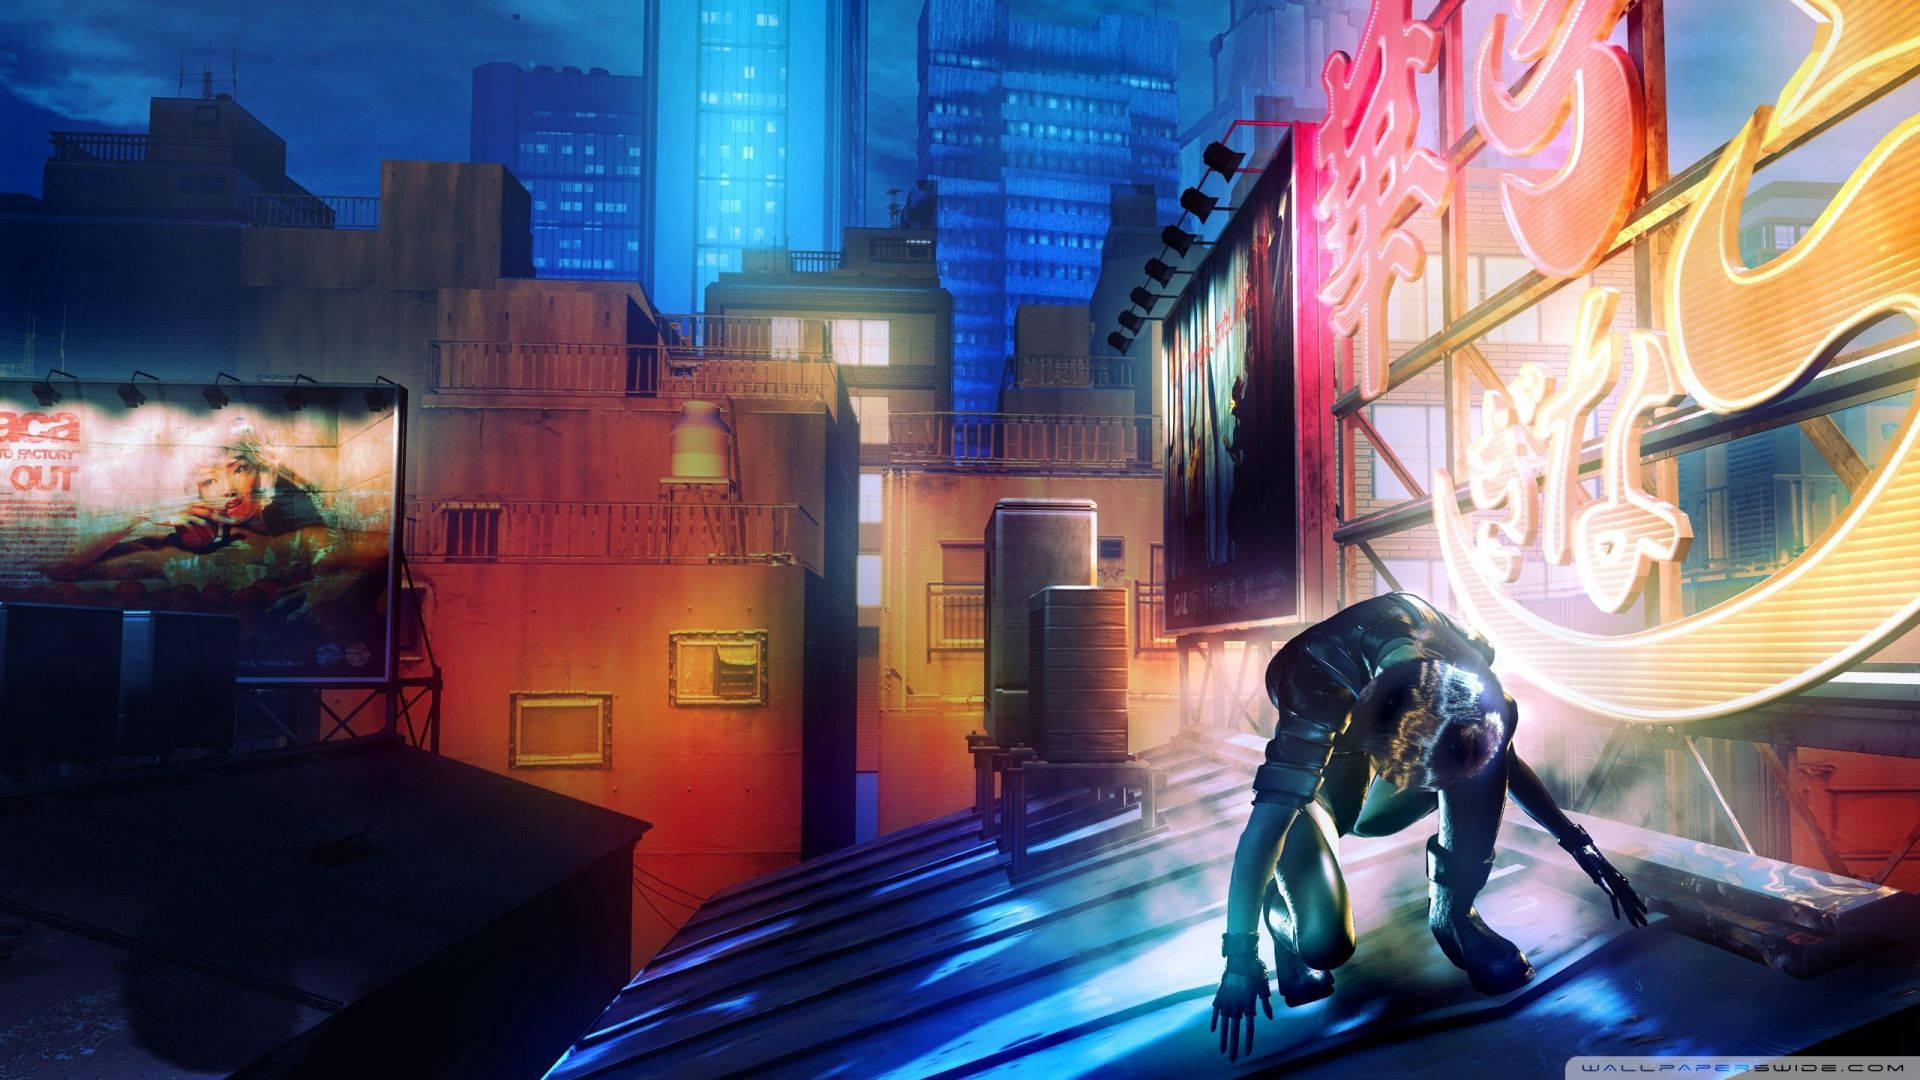 Ghost In The Shell Metropolis Anime Wallpaper